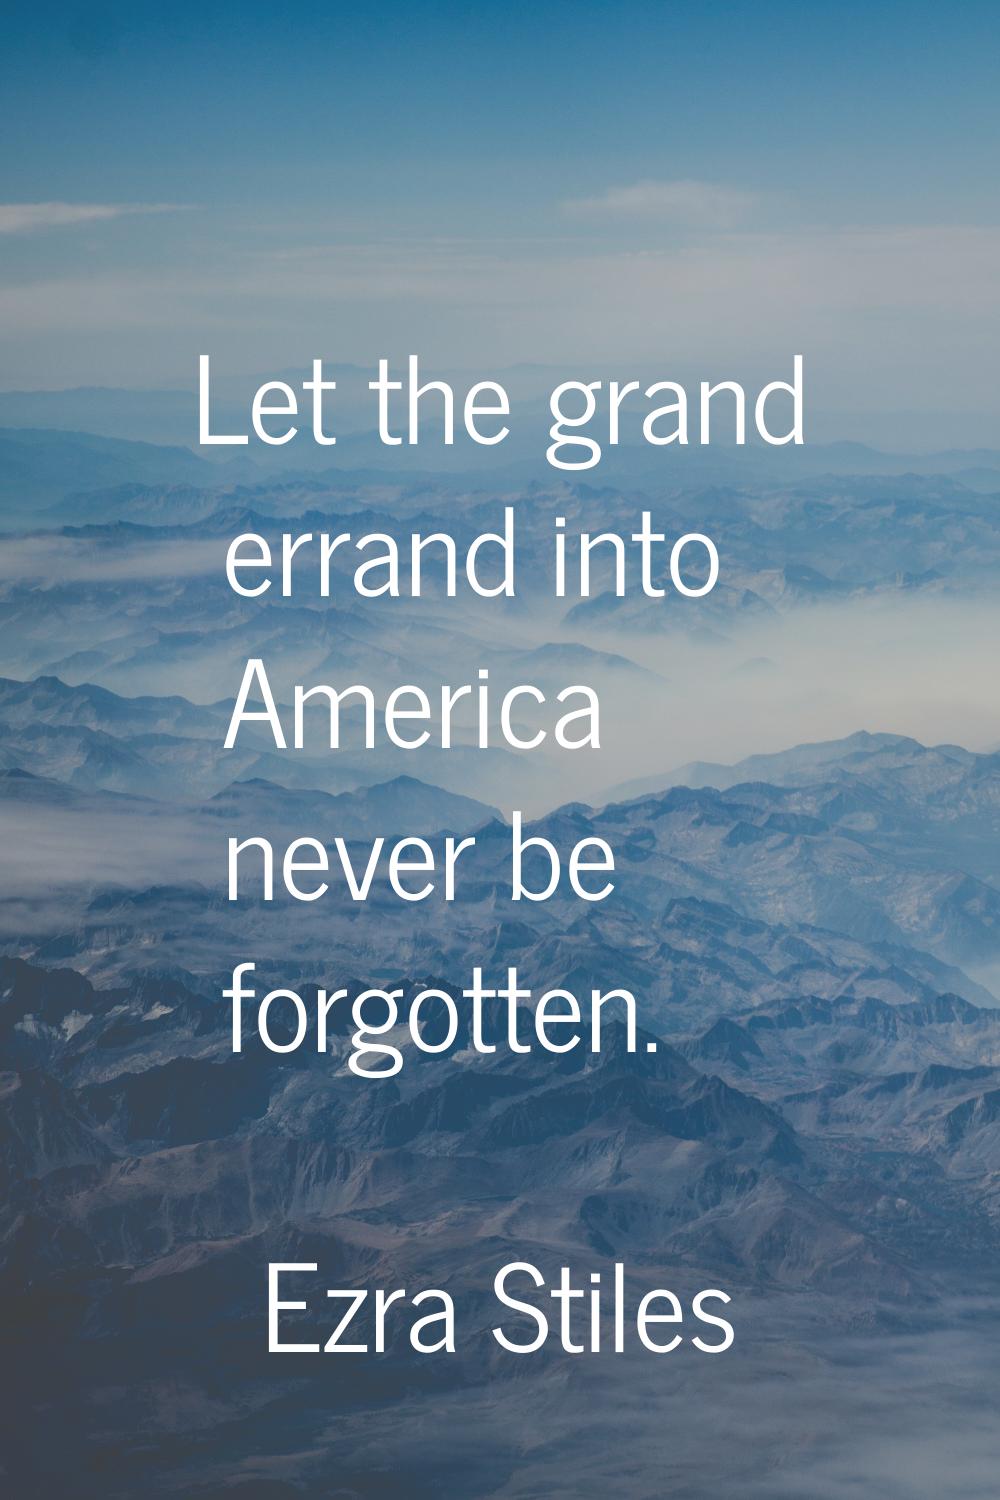 Let the grand errand into America never be forgotten.